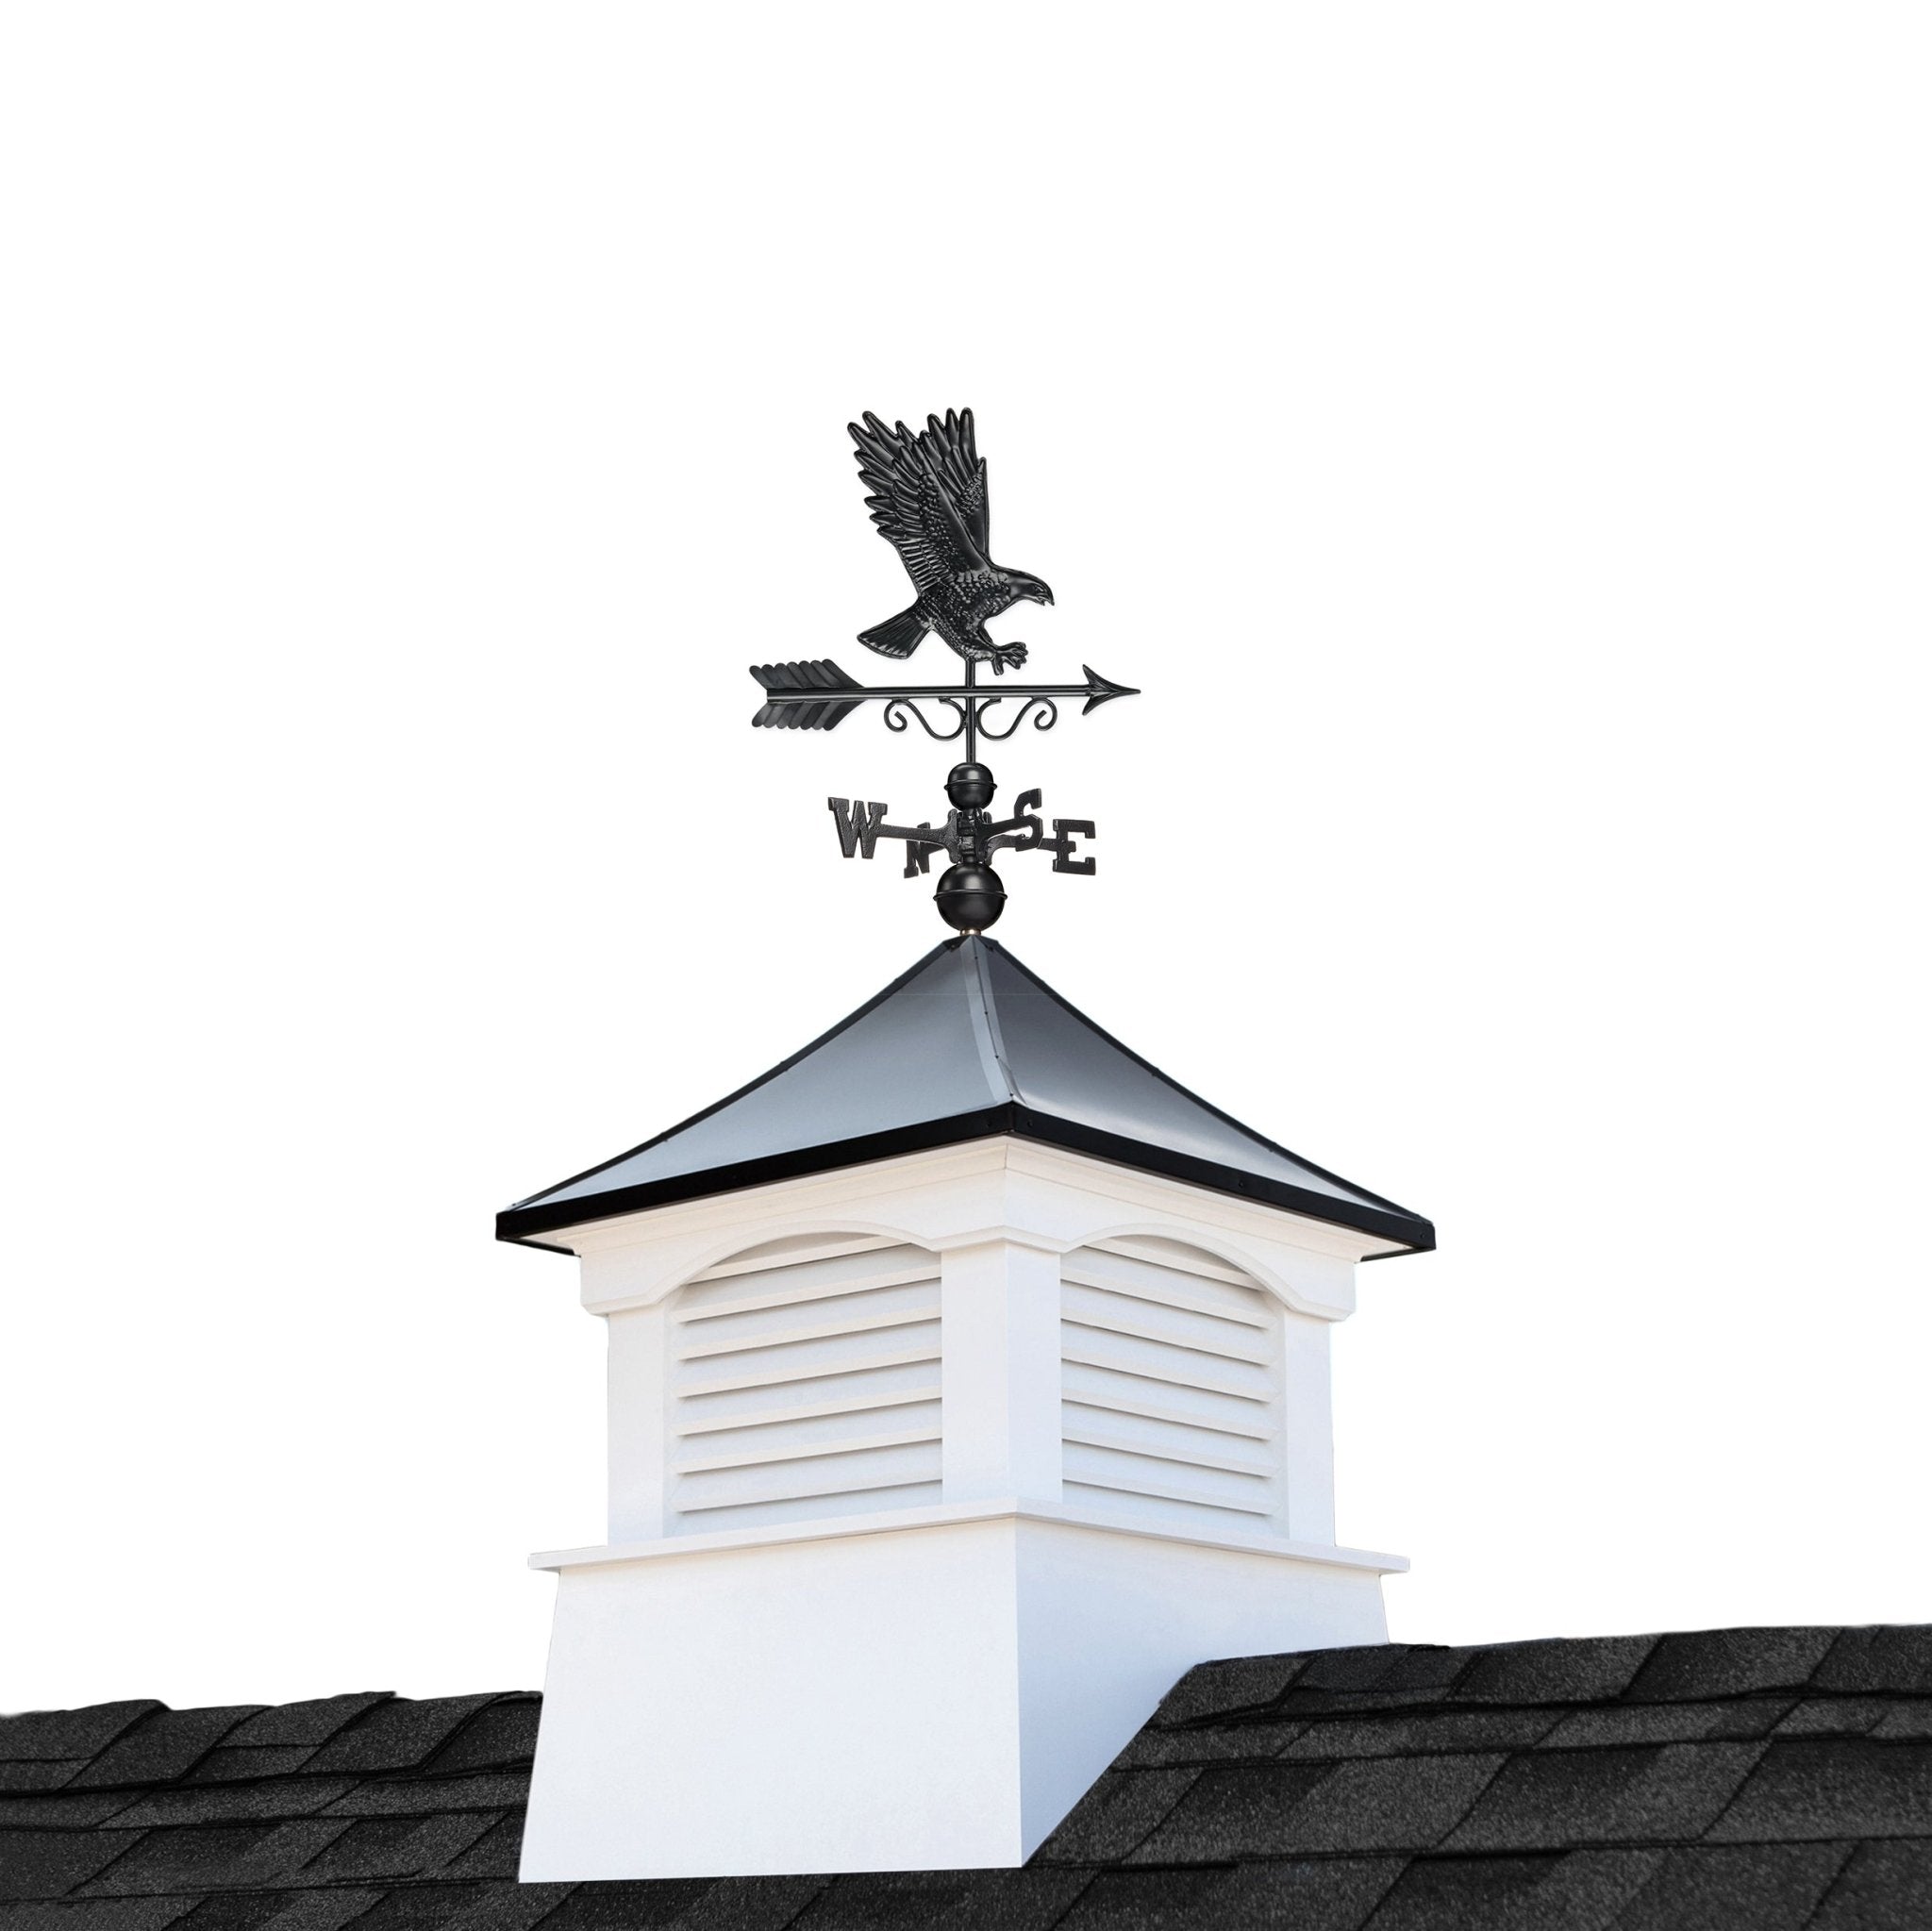 30" Square Coventry Vinyl Cupola with Black Aluminum roof and Black Aluminum Eagle Weathervane - Good Directions